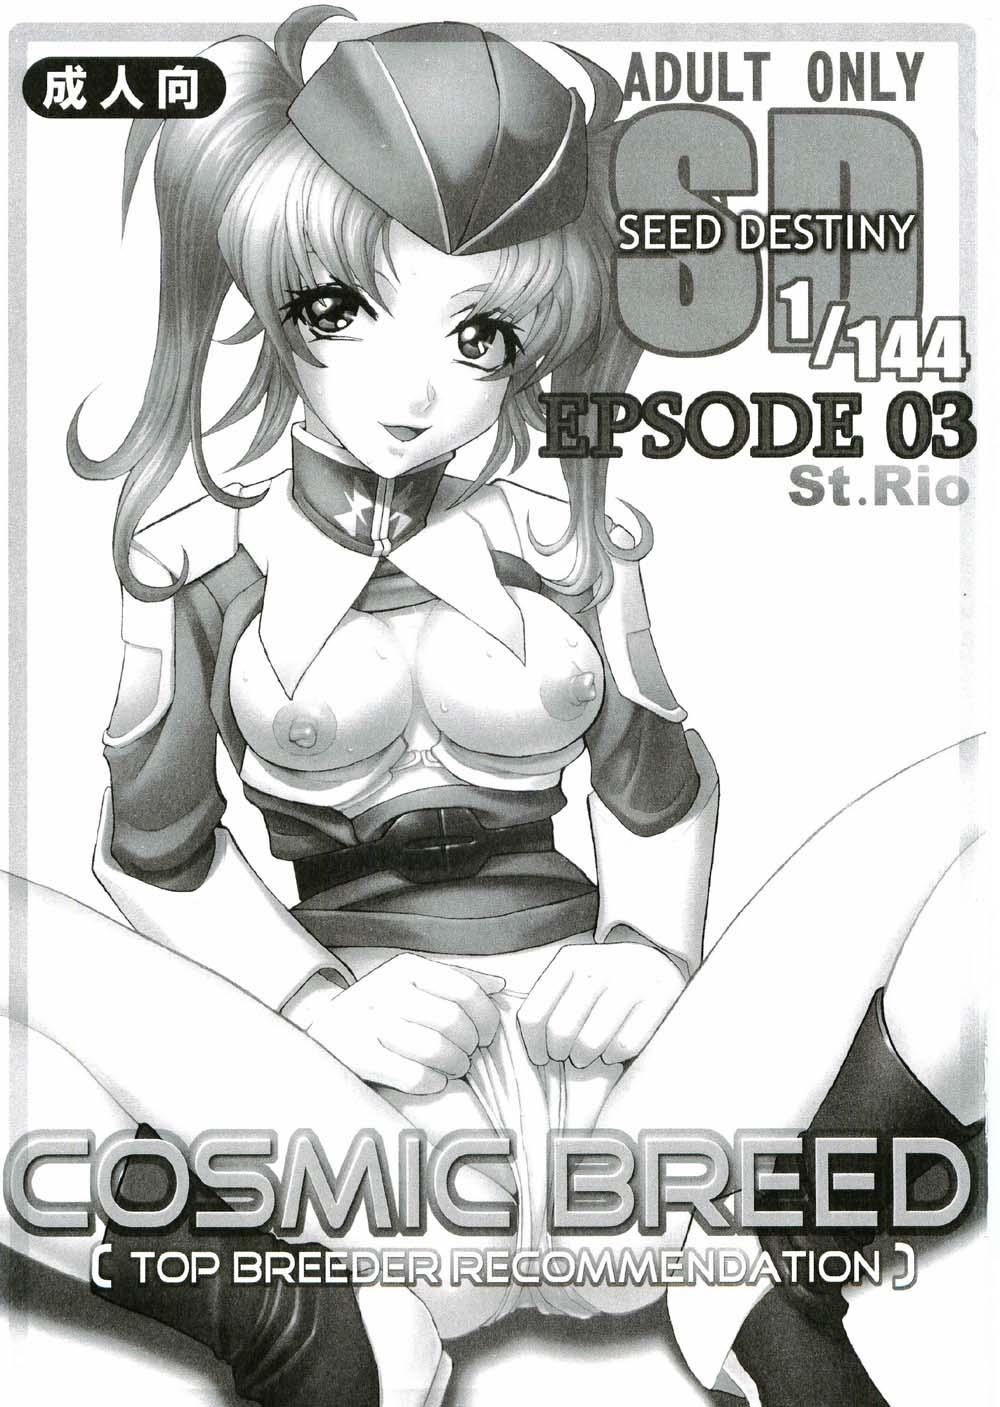 Africa COSMIC BREED 3 - Gundam seed destiny Chastity - Page 2